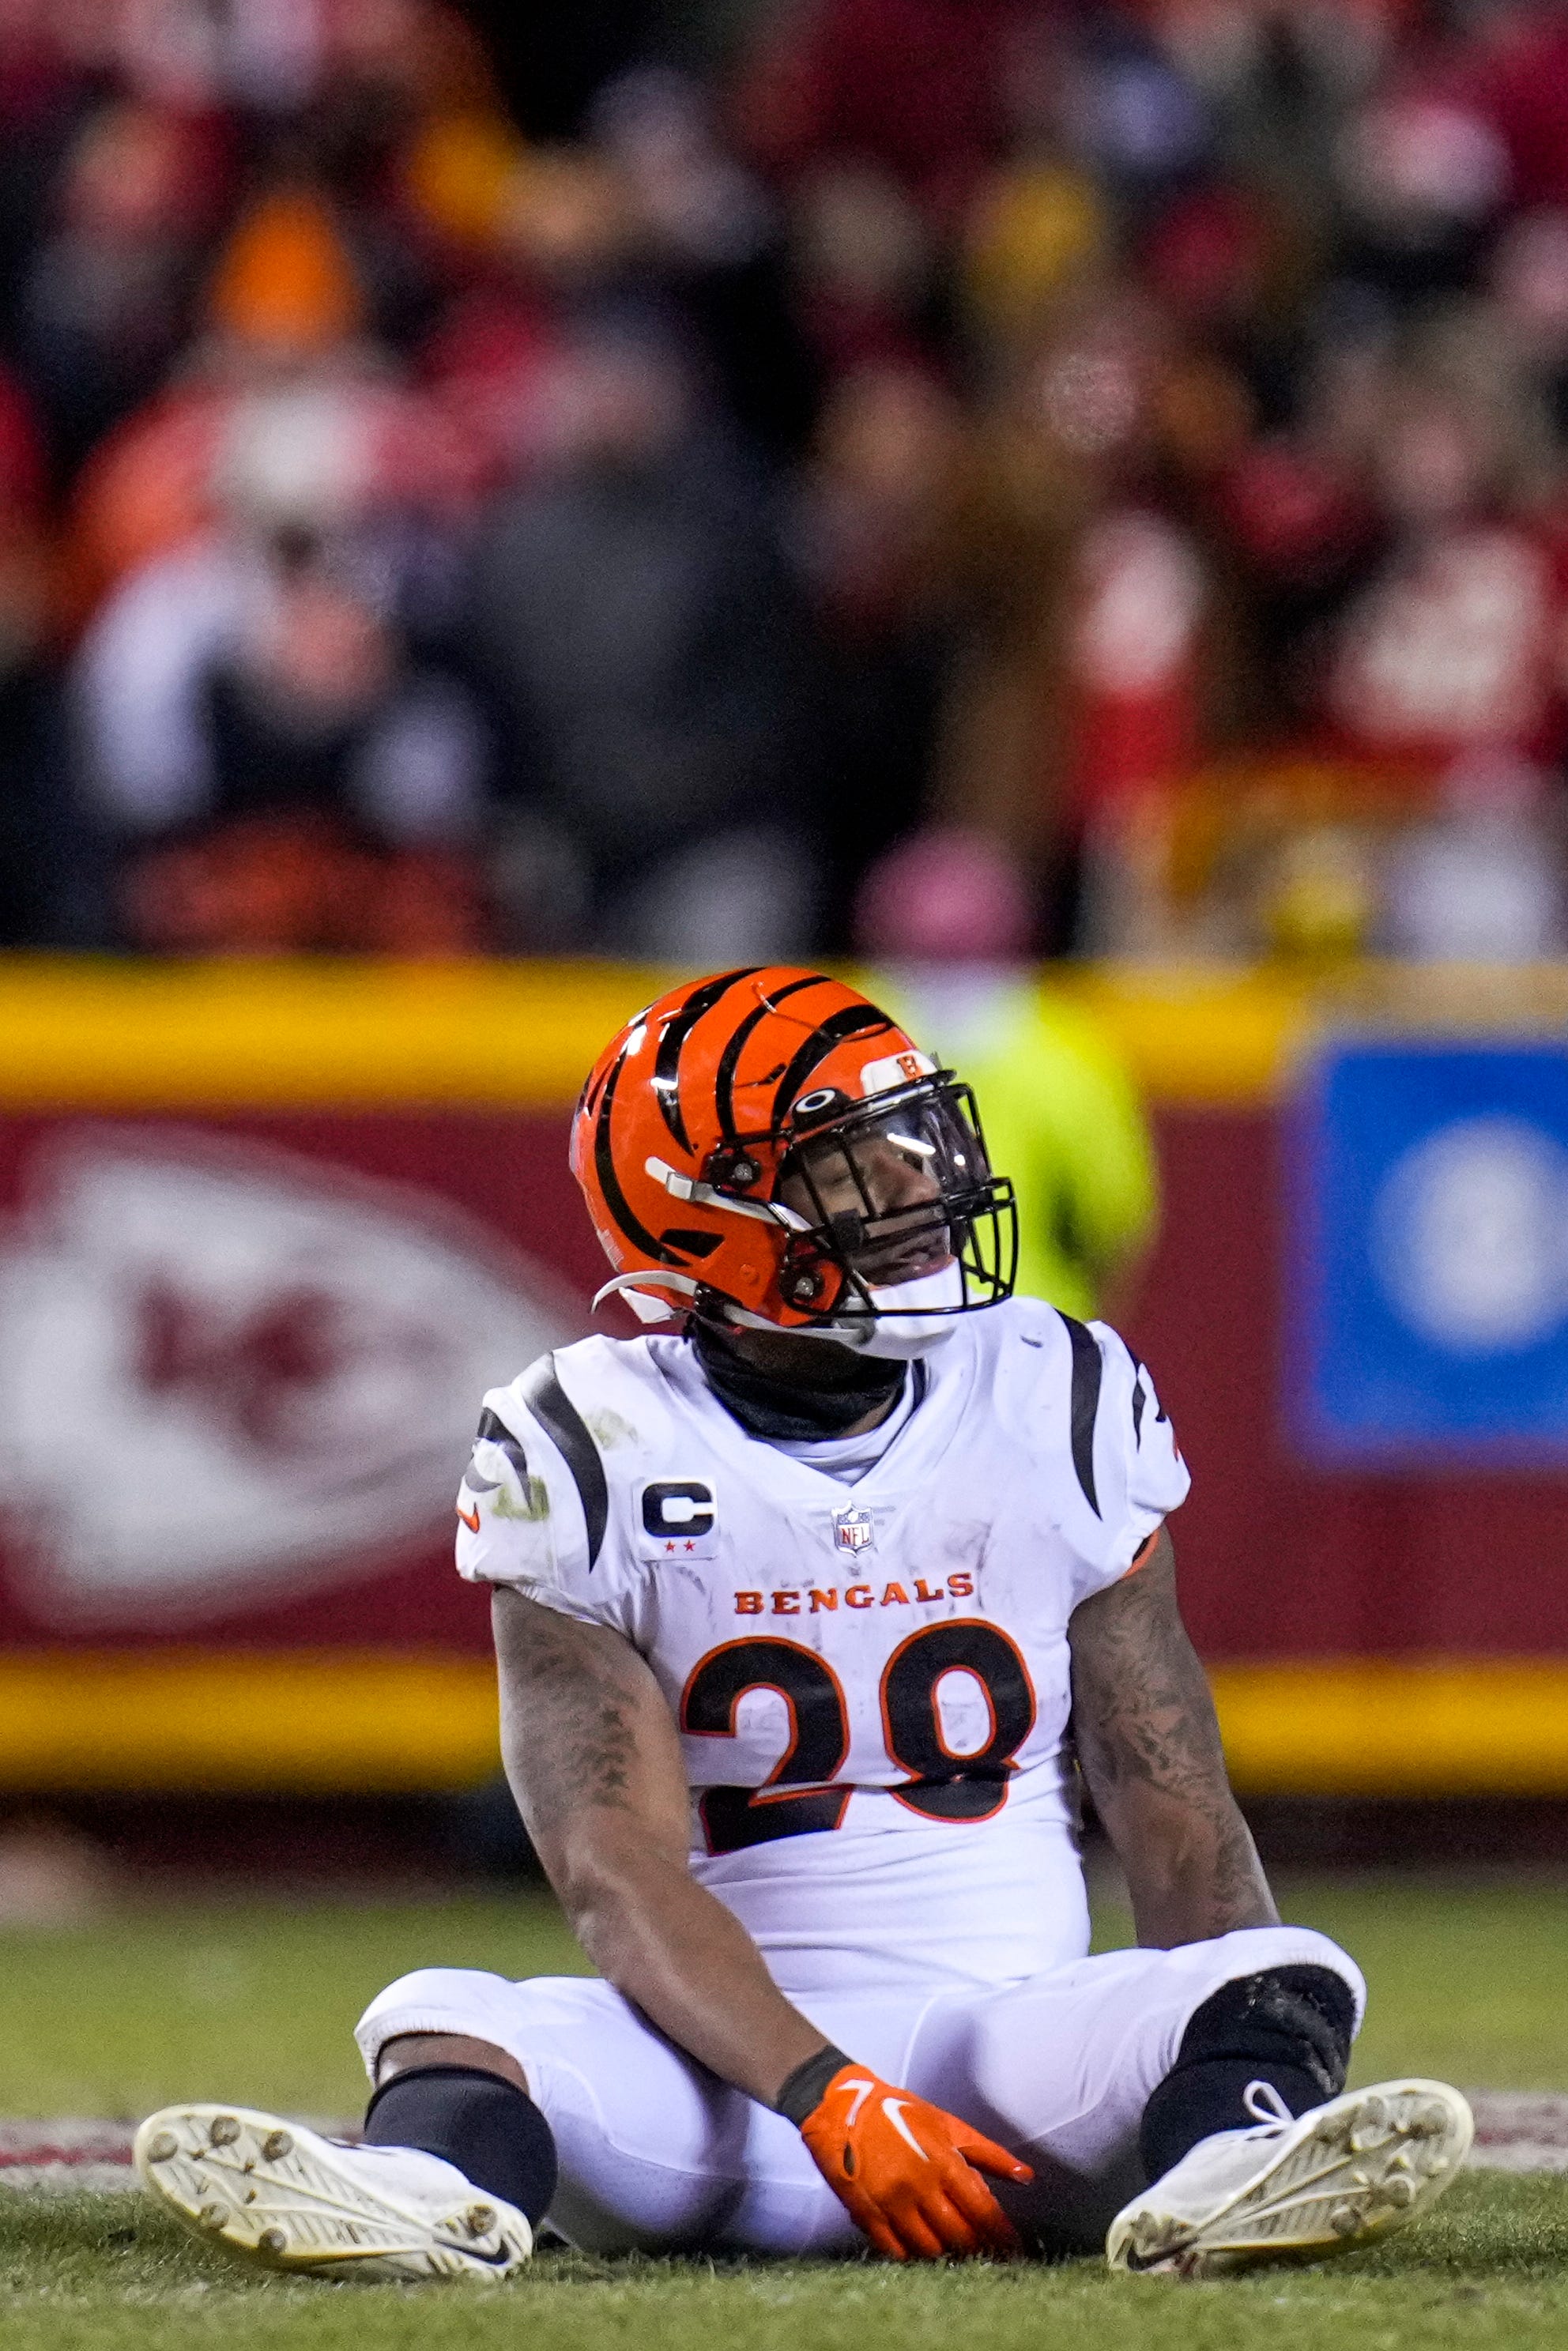 Bengals RB Joe Mixon wanted for aggravated menacing, agent says charge will be dropped